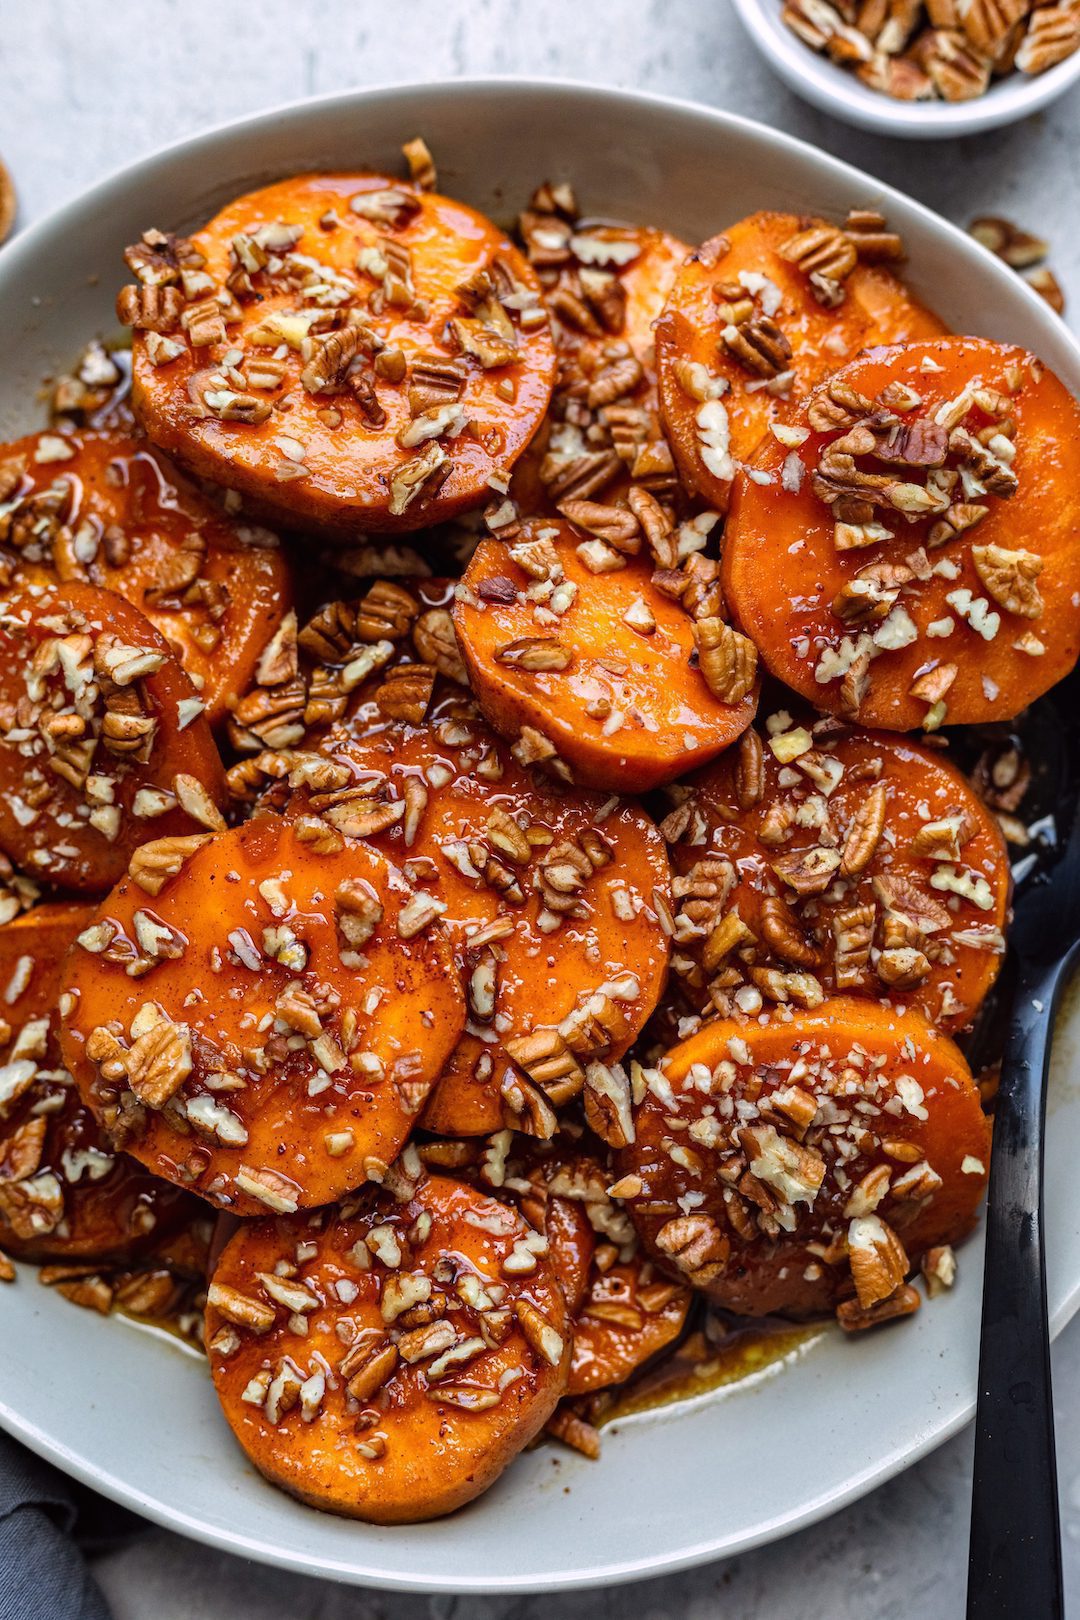 A heaping plate of CrockPot Maple Bourbon Candied Sweet Potatoes, topped generously with chopped pecans.